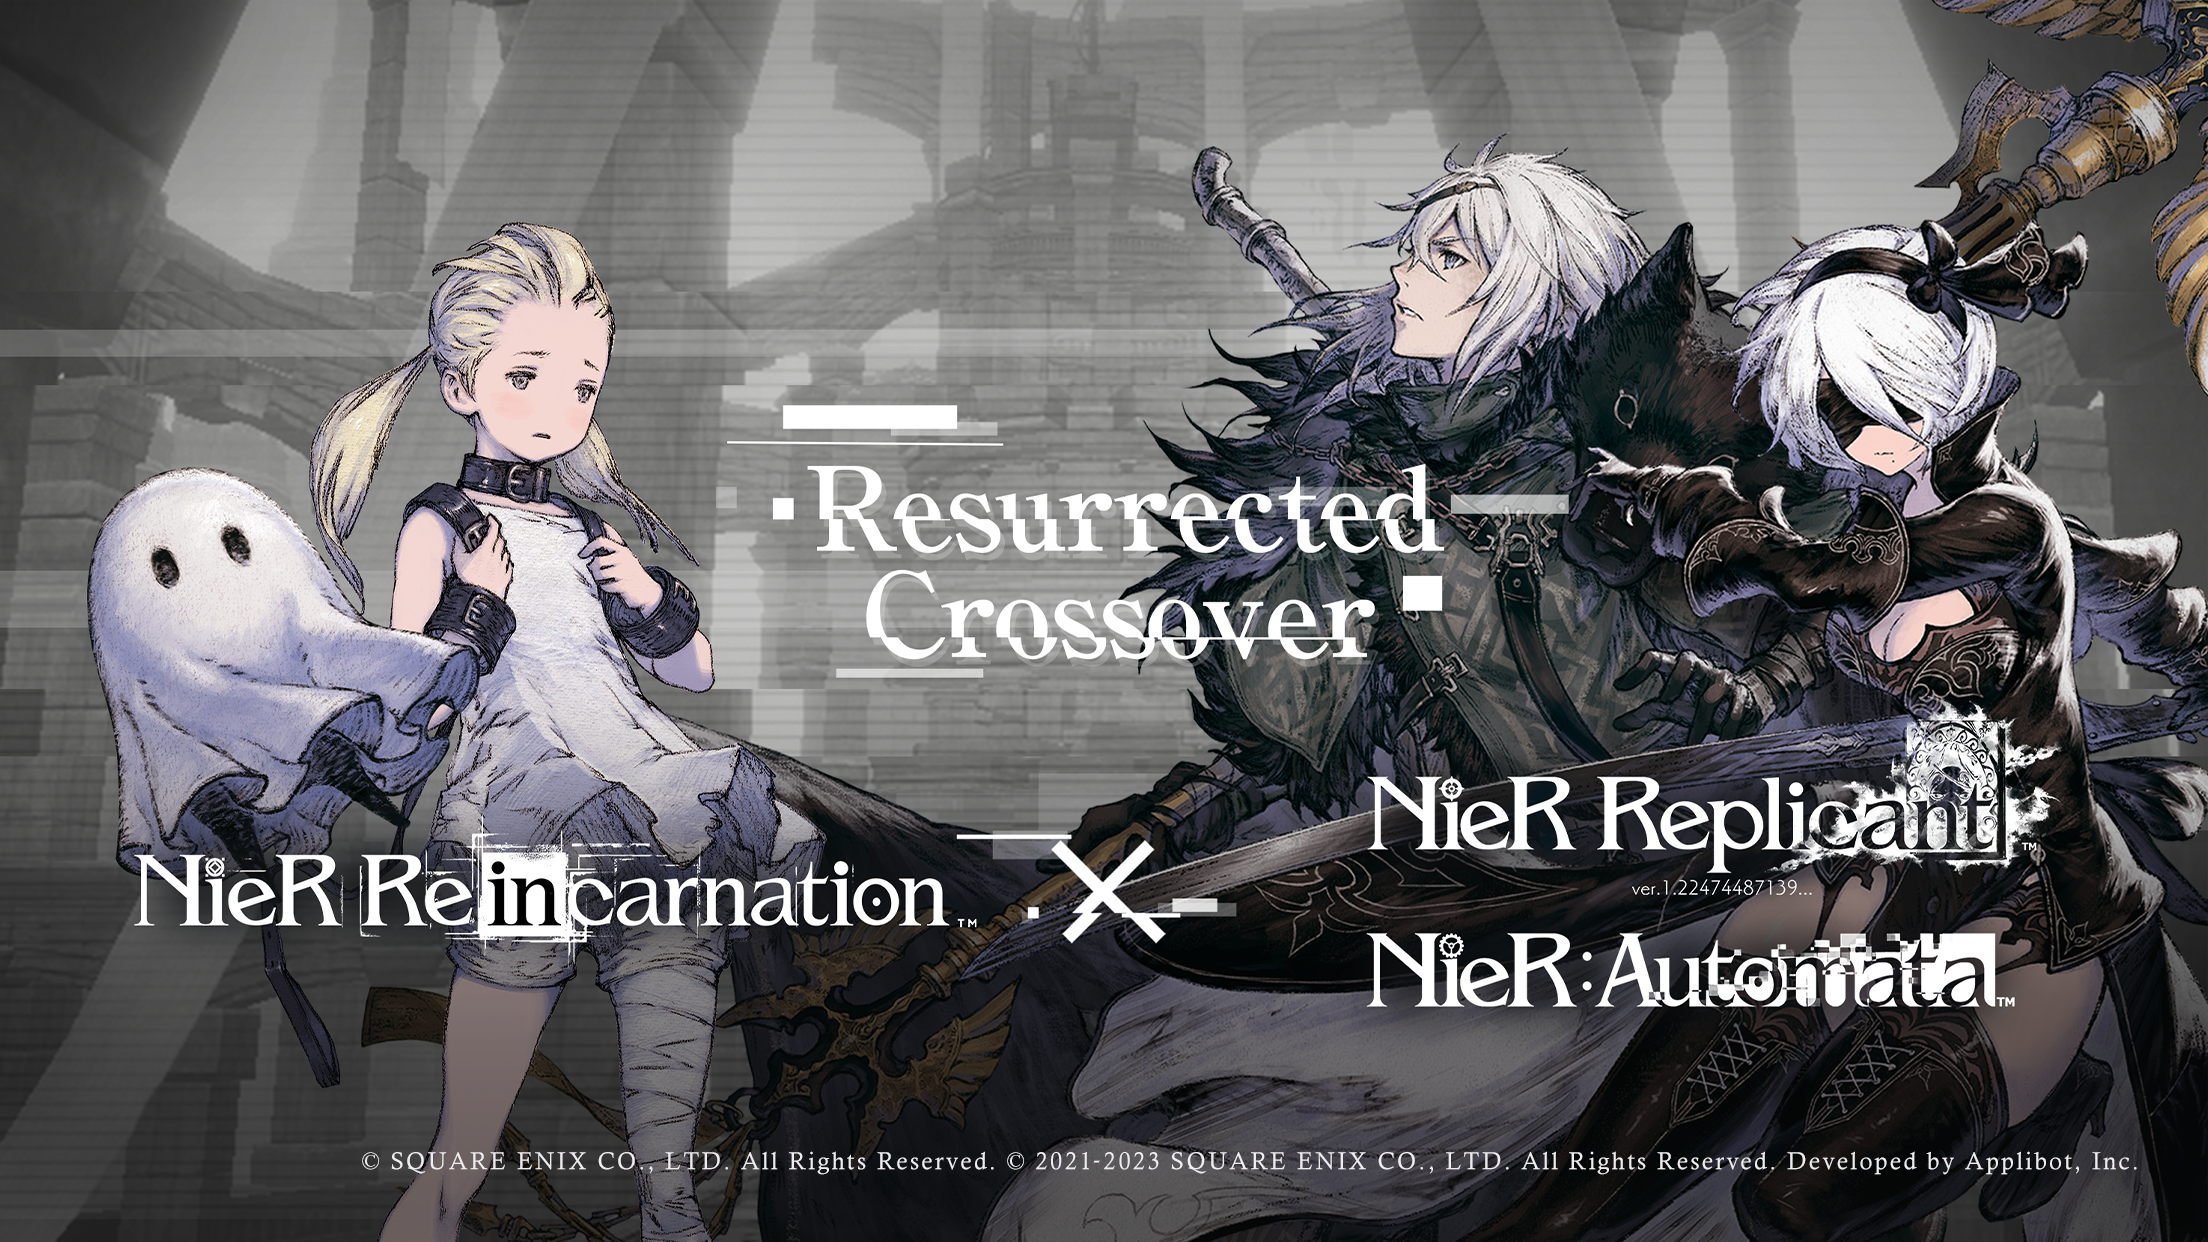 Guidelines for Livestreaming and Posting Video/Images from NieR  Re[in]carnation, NieR Re[in]carnation